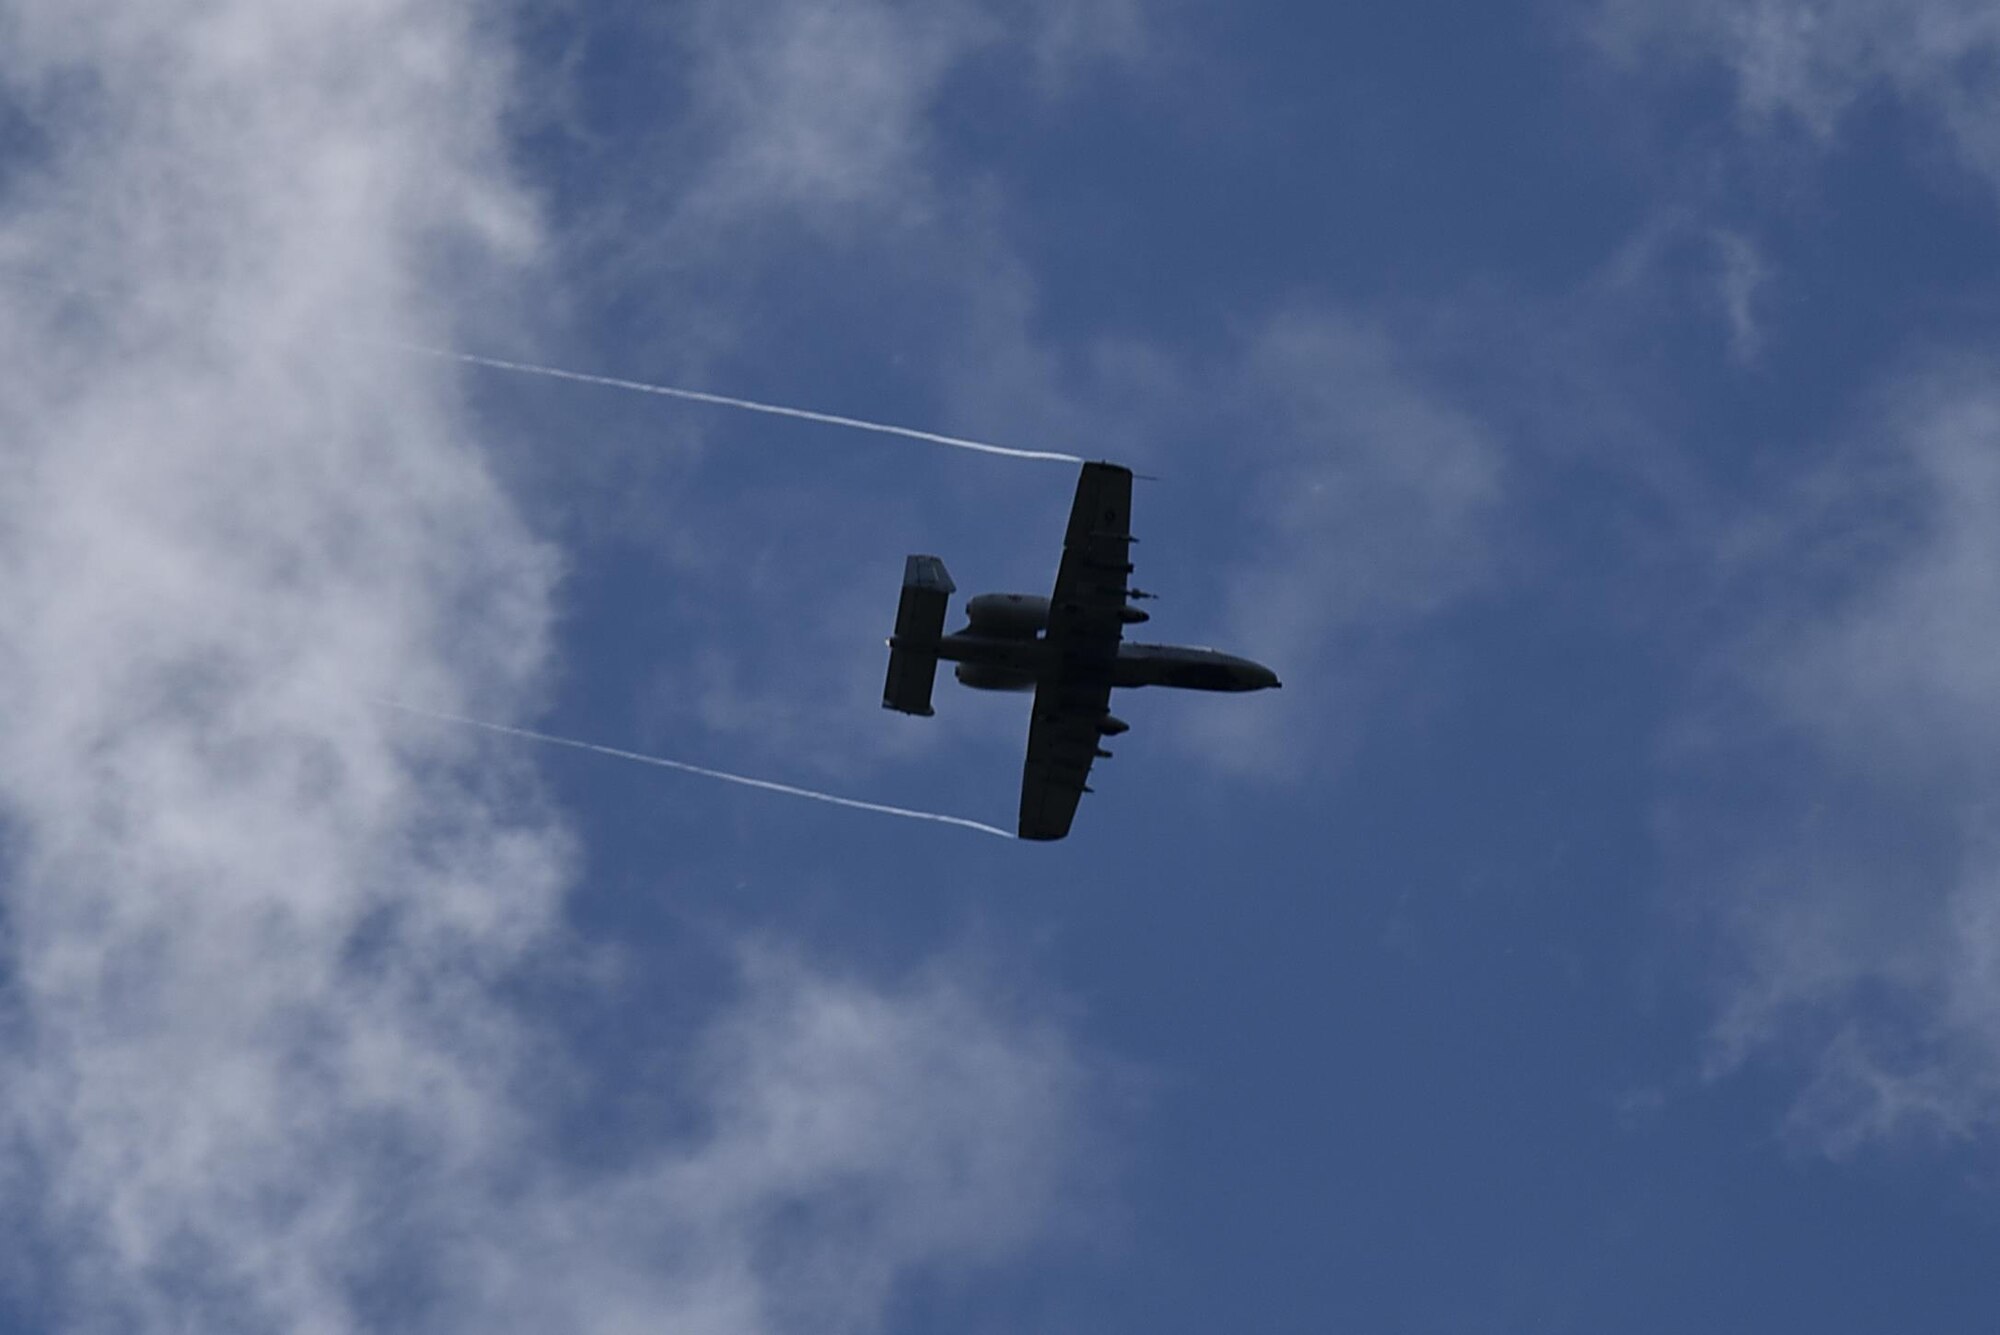 An A-10C Thunderbolt II aircraft participates in a training exercise Aug. 14, 2017, at Tapa Range, Estonia. The flying training deployment is funded by the European Reassurance Initiative in support of Operation Atlantic Resolve. The U.S. Air Force’s forward presence in Europe allows the U.S. to work with allies and partners to develop and improve ready air forces capable of maintaining regional security. (U.S. Air National Guard photo by Airman 1st Class Sarah M. McClanahan)